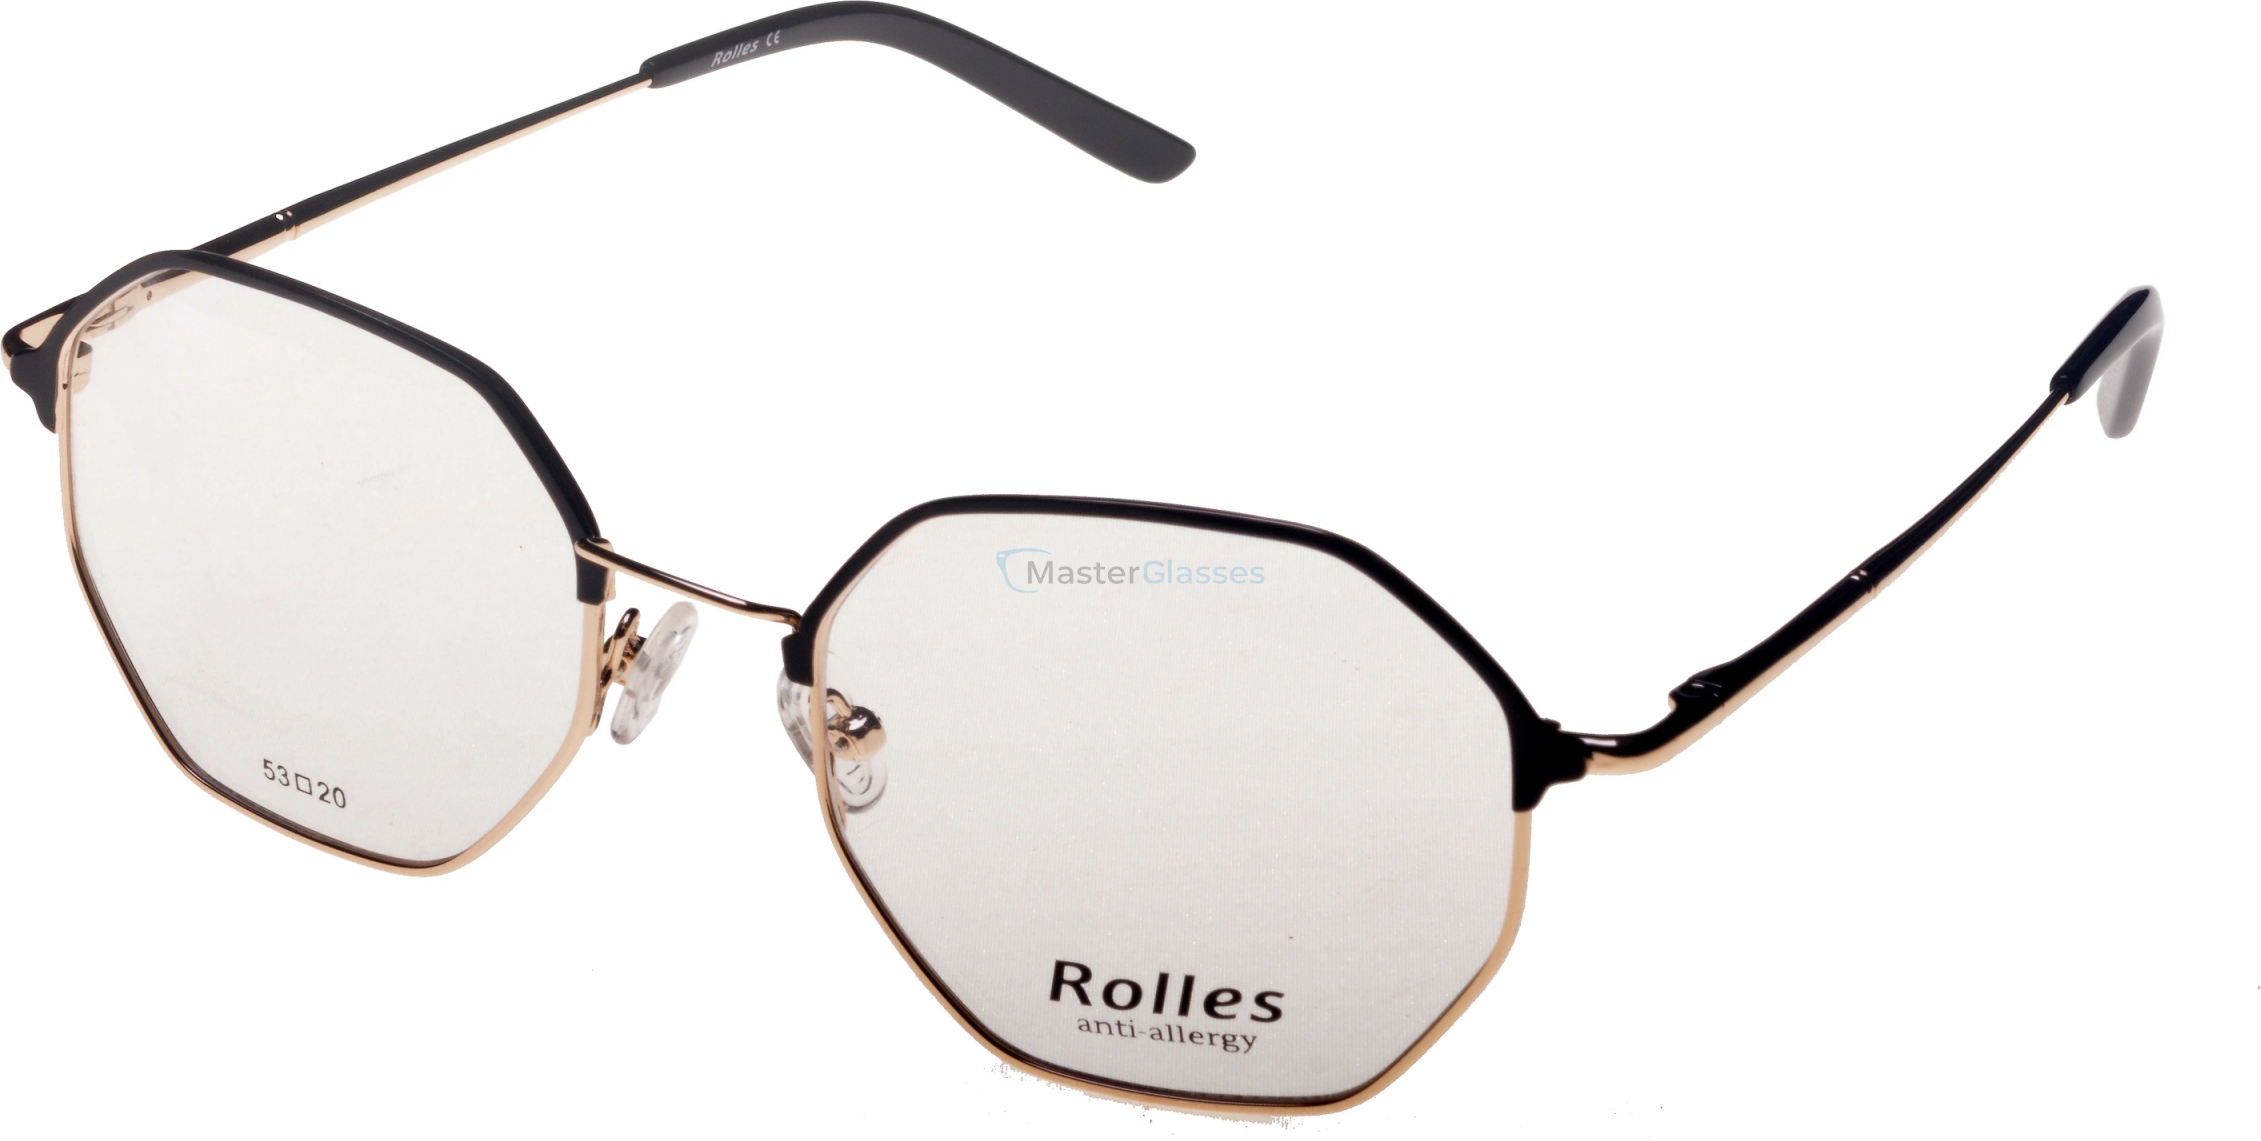  Rolles 694 01